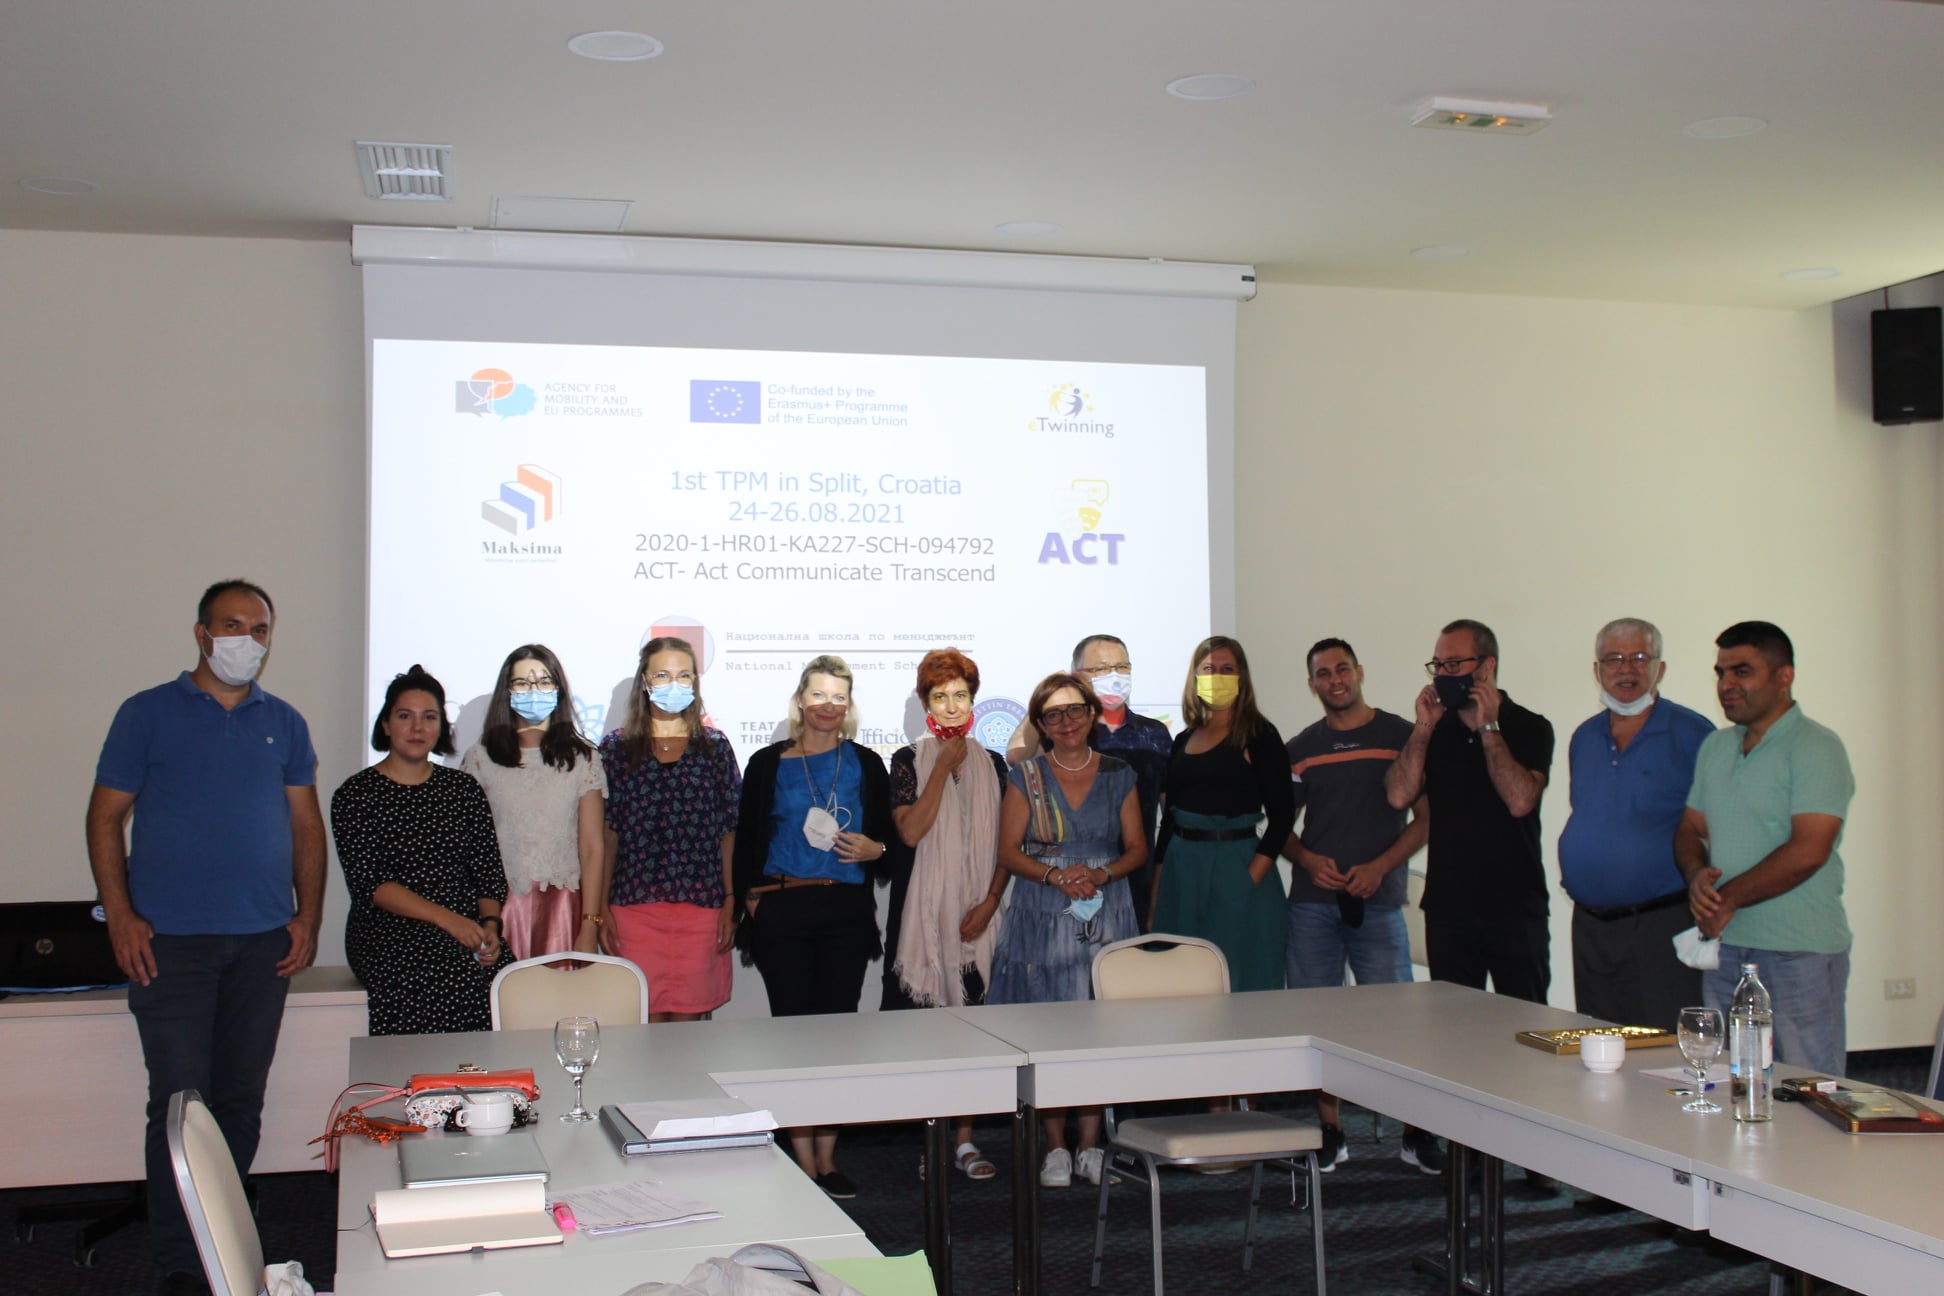 1st TPM - ACT: Kick-off meeting took place in Split, Croatia with all the partners present